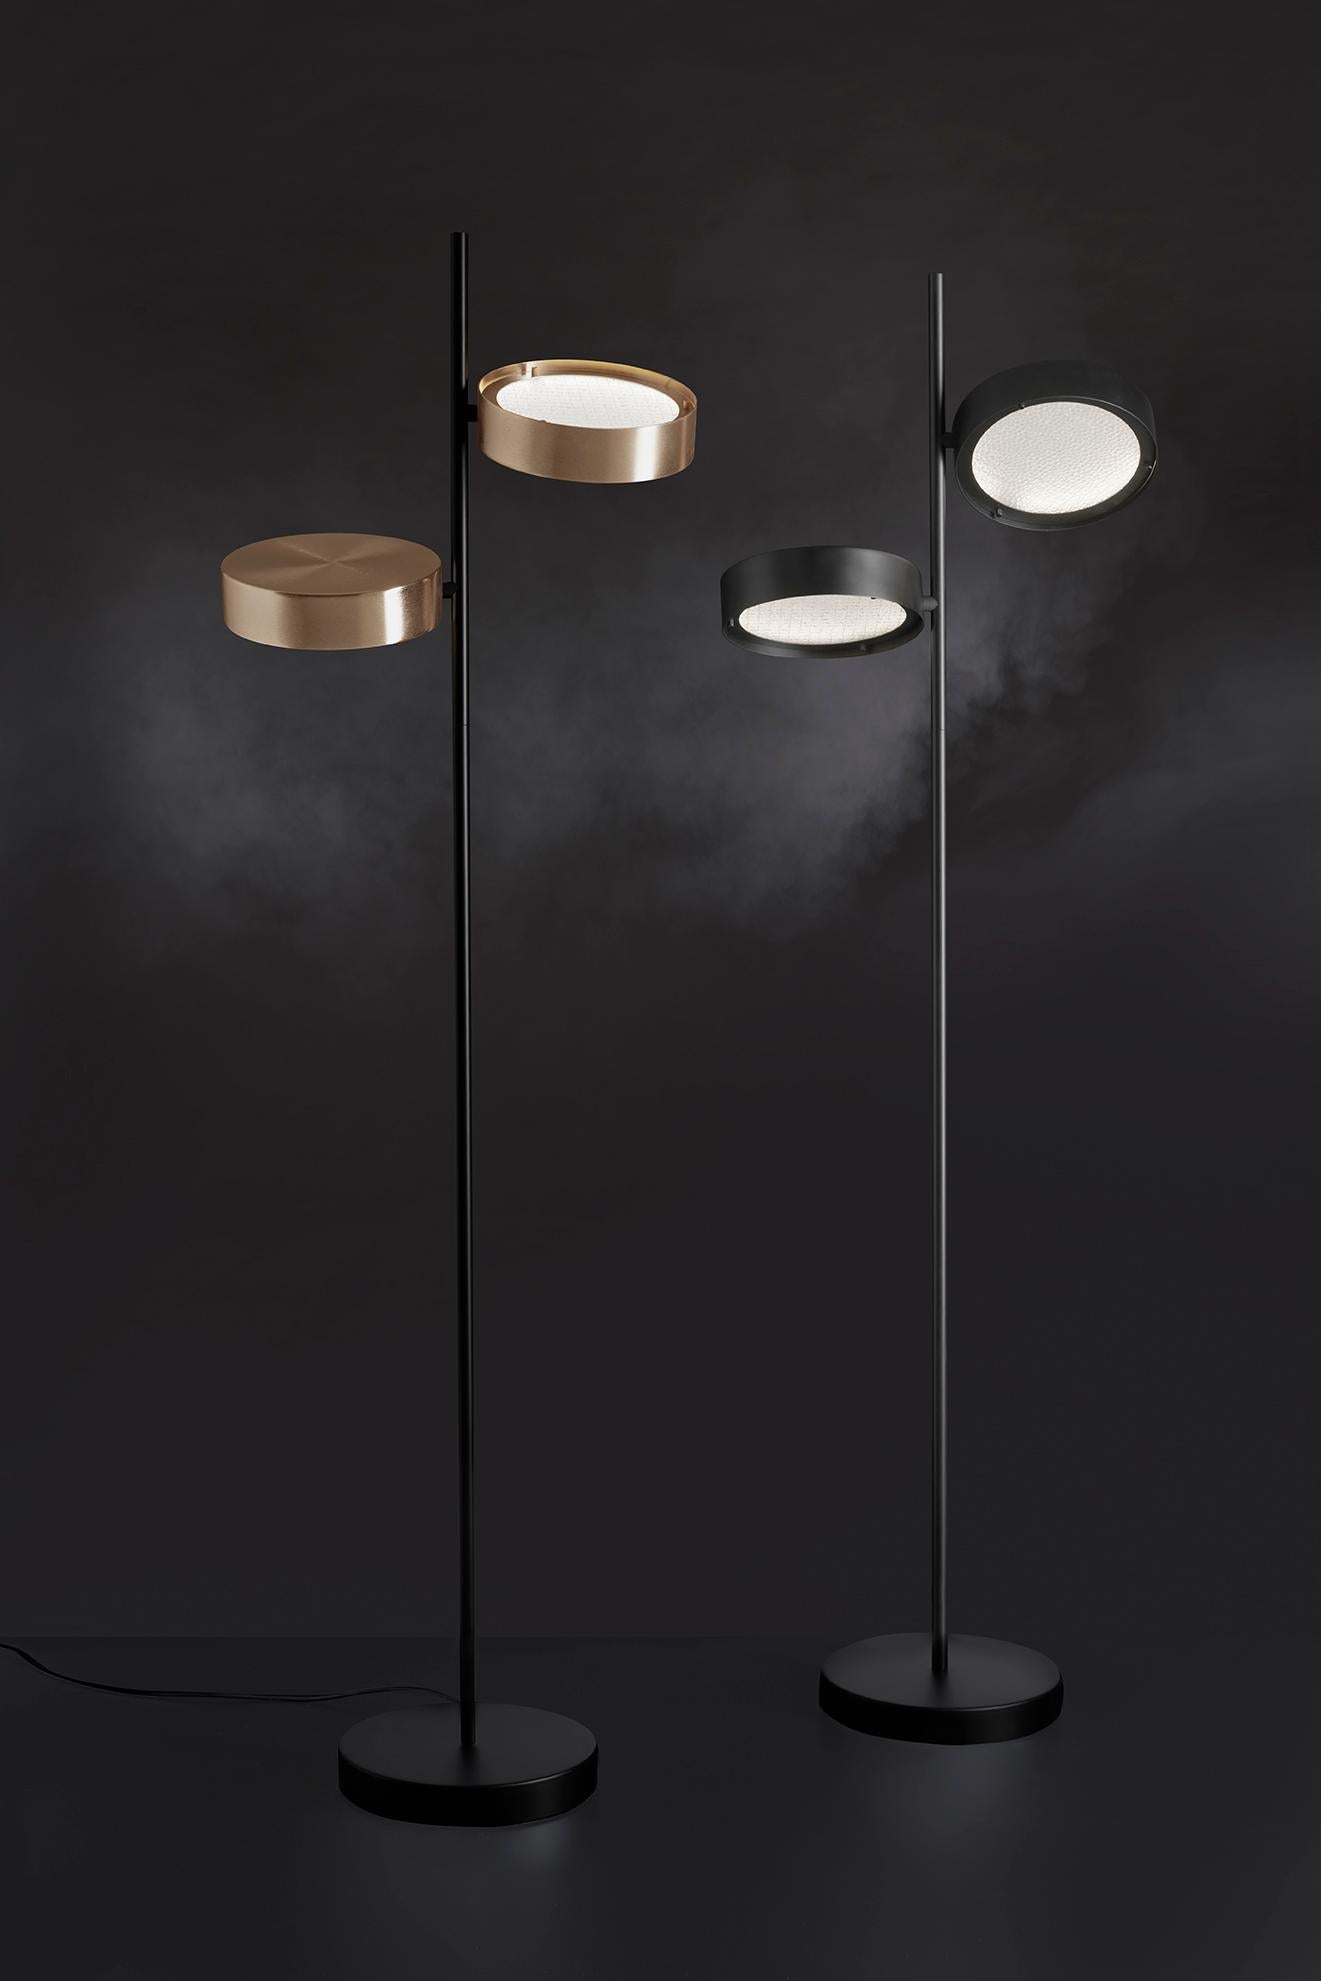 Echoes of bygone eras reinterpreted with refined contemporary precision. The elegance of Berlin is embodied in the metal ring diffusers with their considerable thickness and slender profile, enclosing decorative wired glass discs. The diffusers,